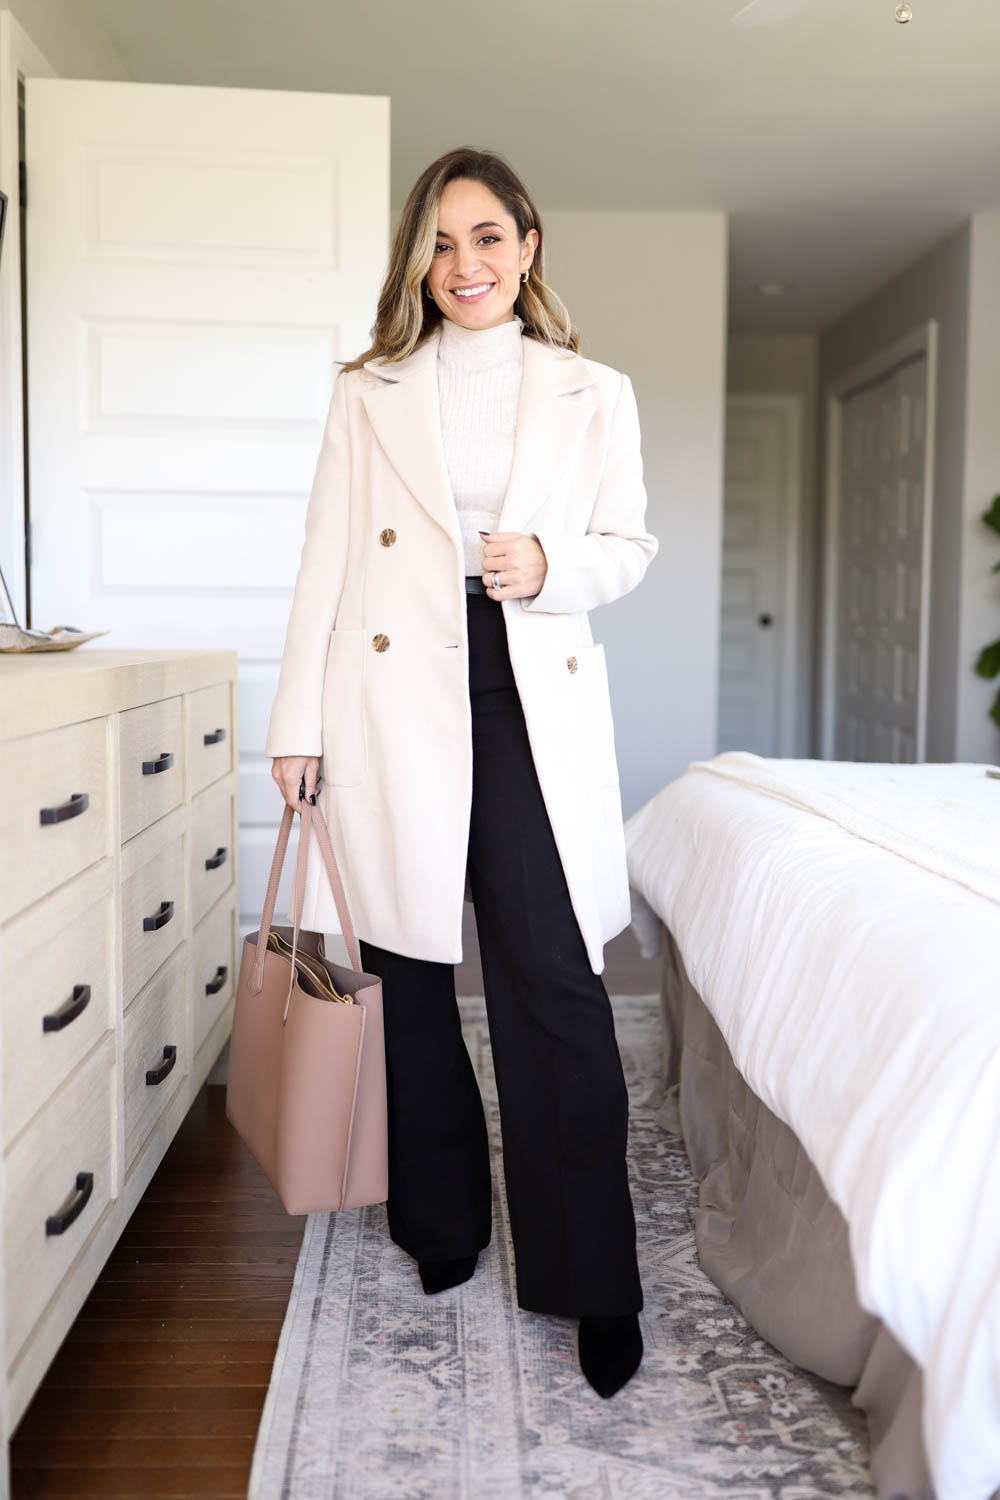 Top 10 boots and dress pants work outfits ideas and inspiration